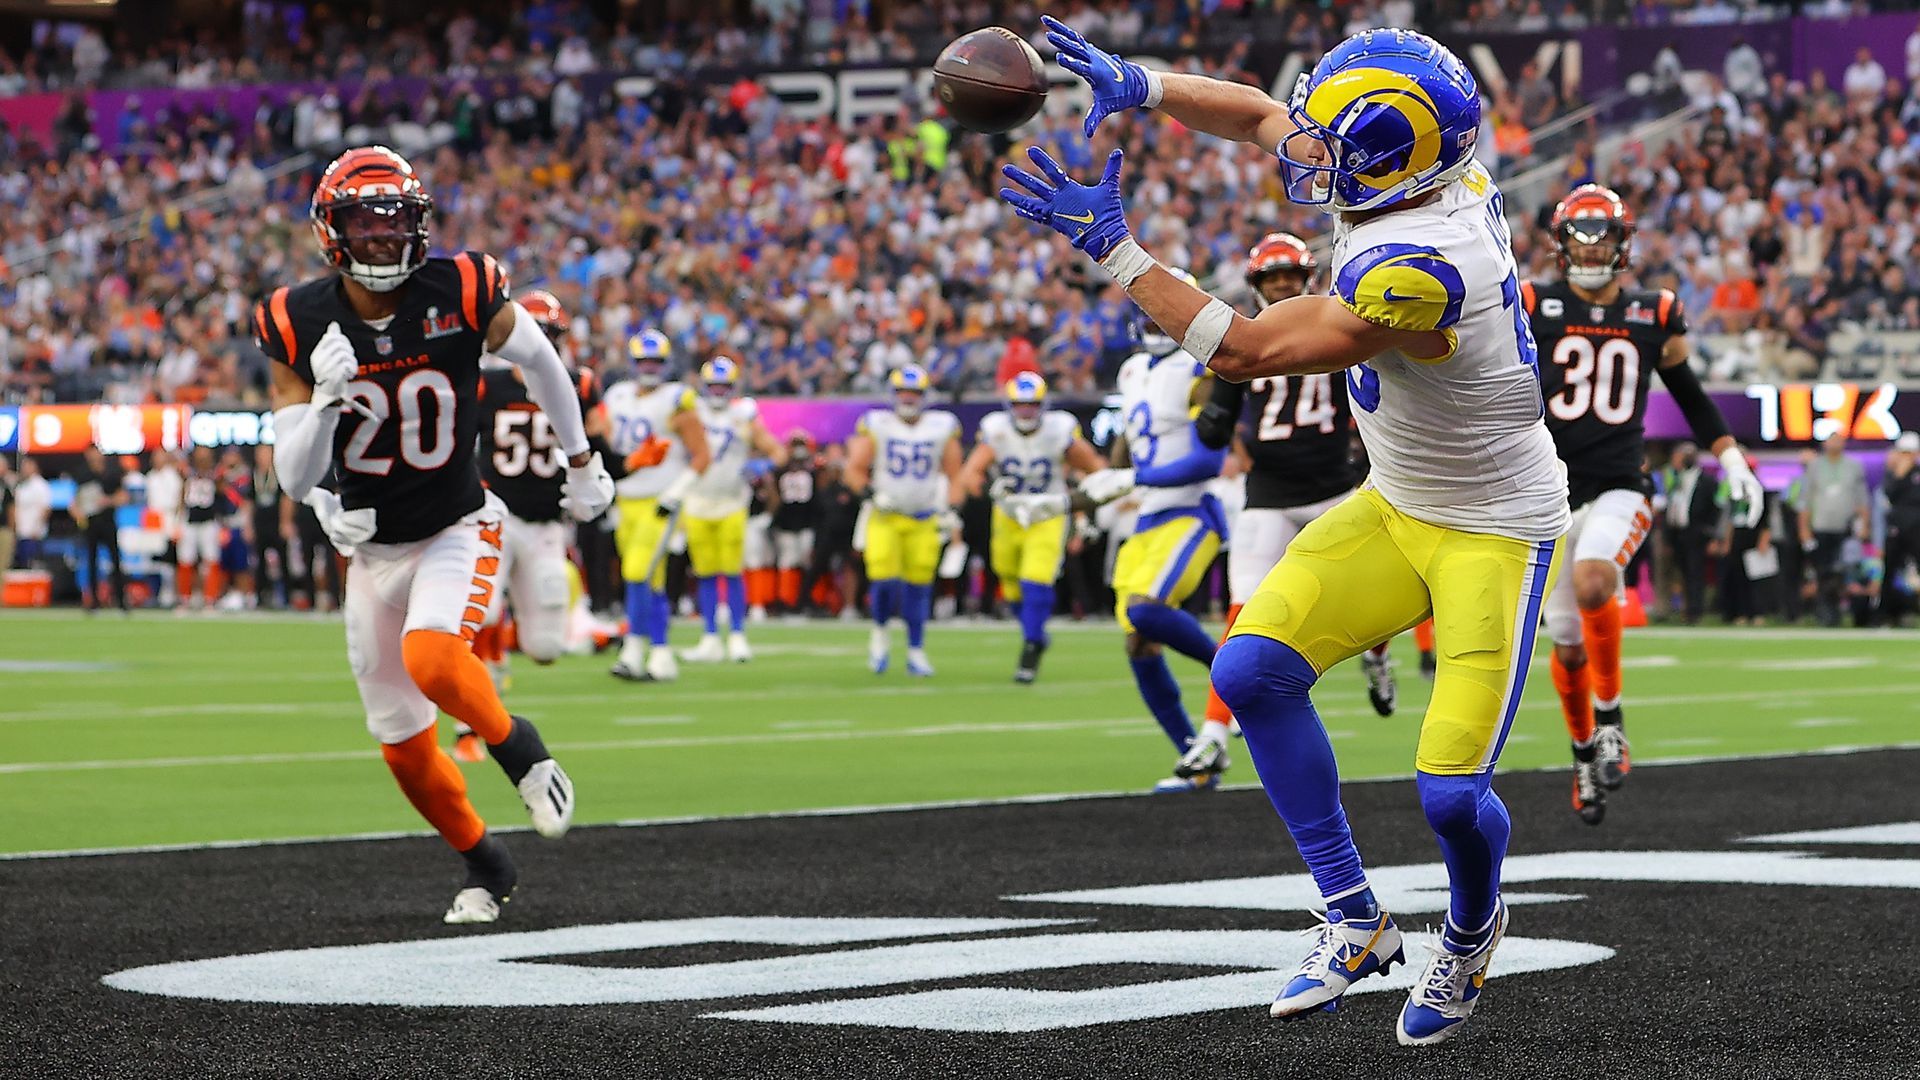 Cooper Kupp of the Los Angeles Rams makes a touchdown catch in front of Eli Apple (20) of the Cincinnati Bengals during Super Bowl LVI at SoFi Stadium on Feb. 13 in Inglewood, Calif.